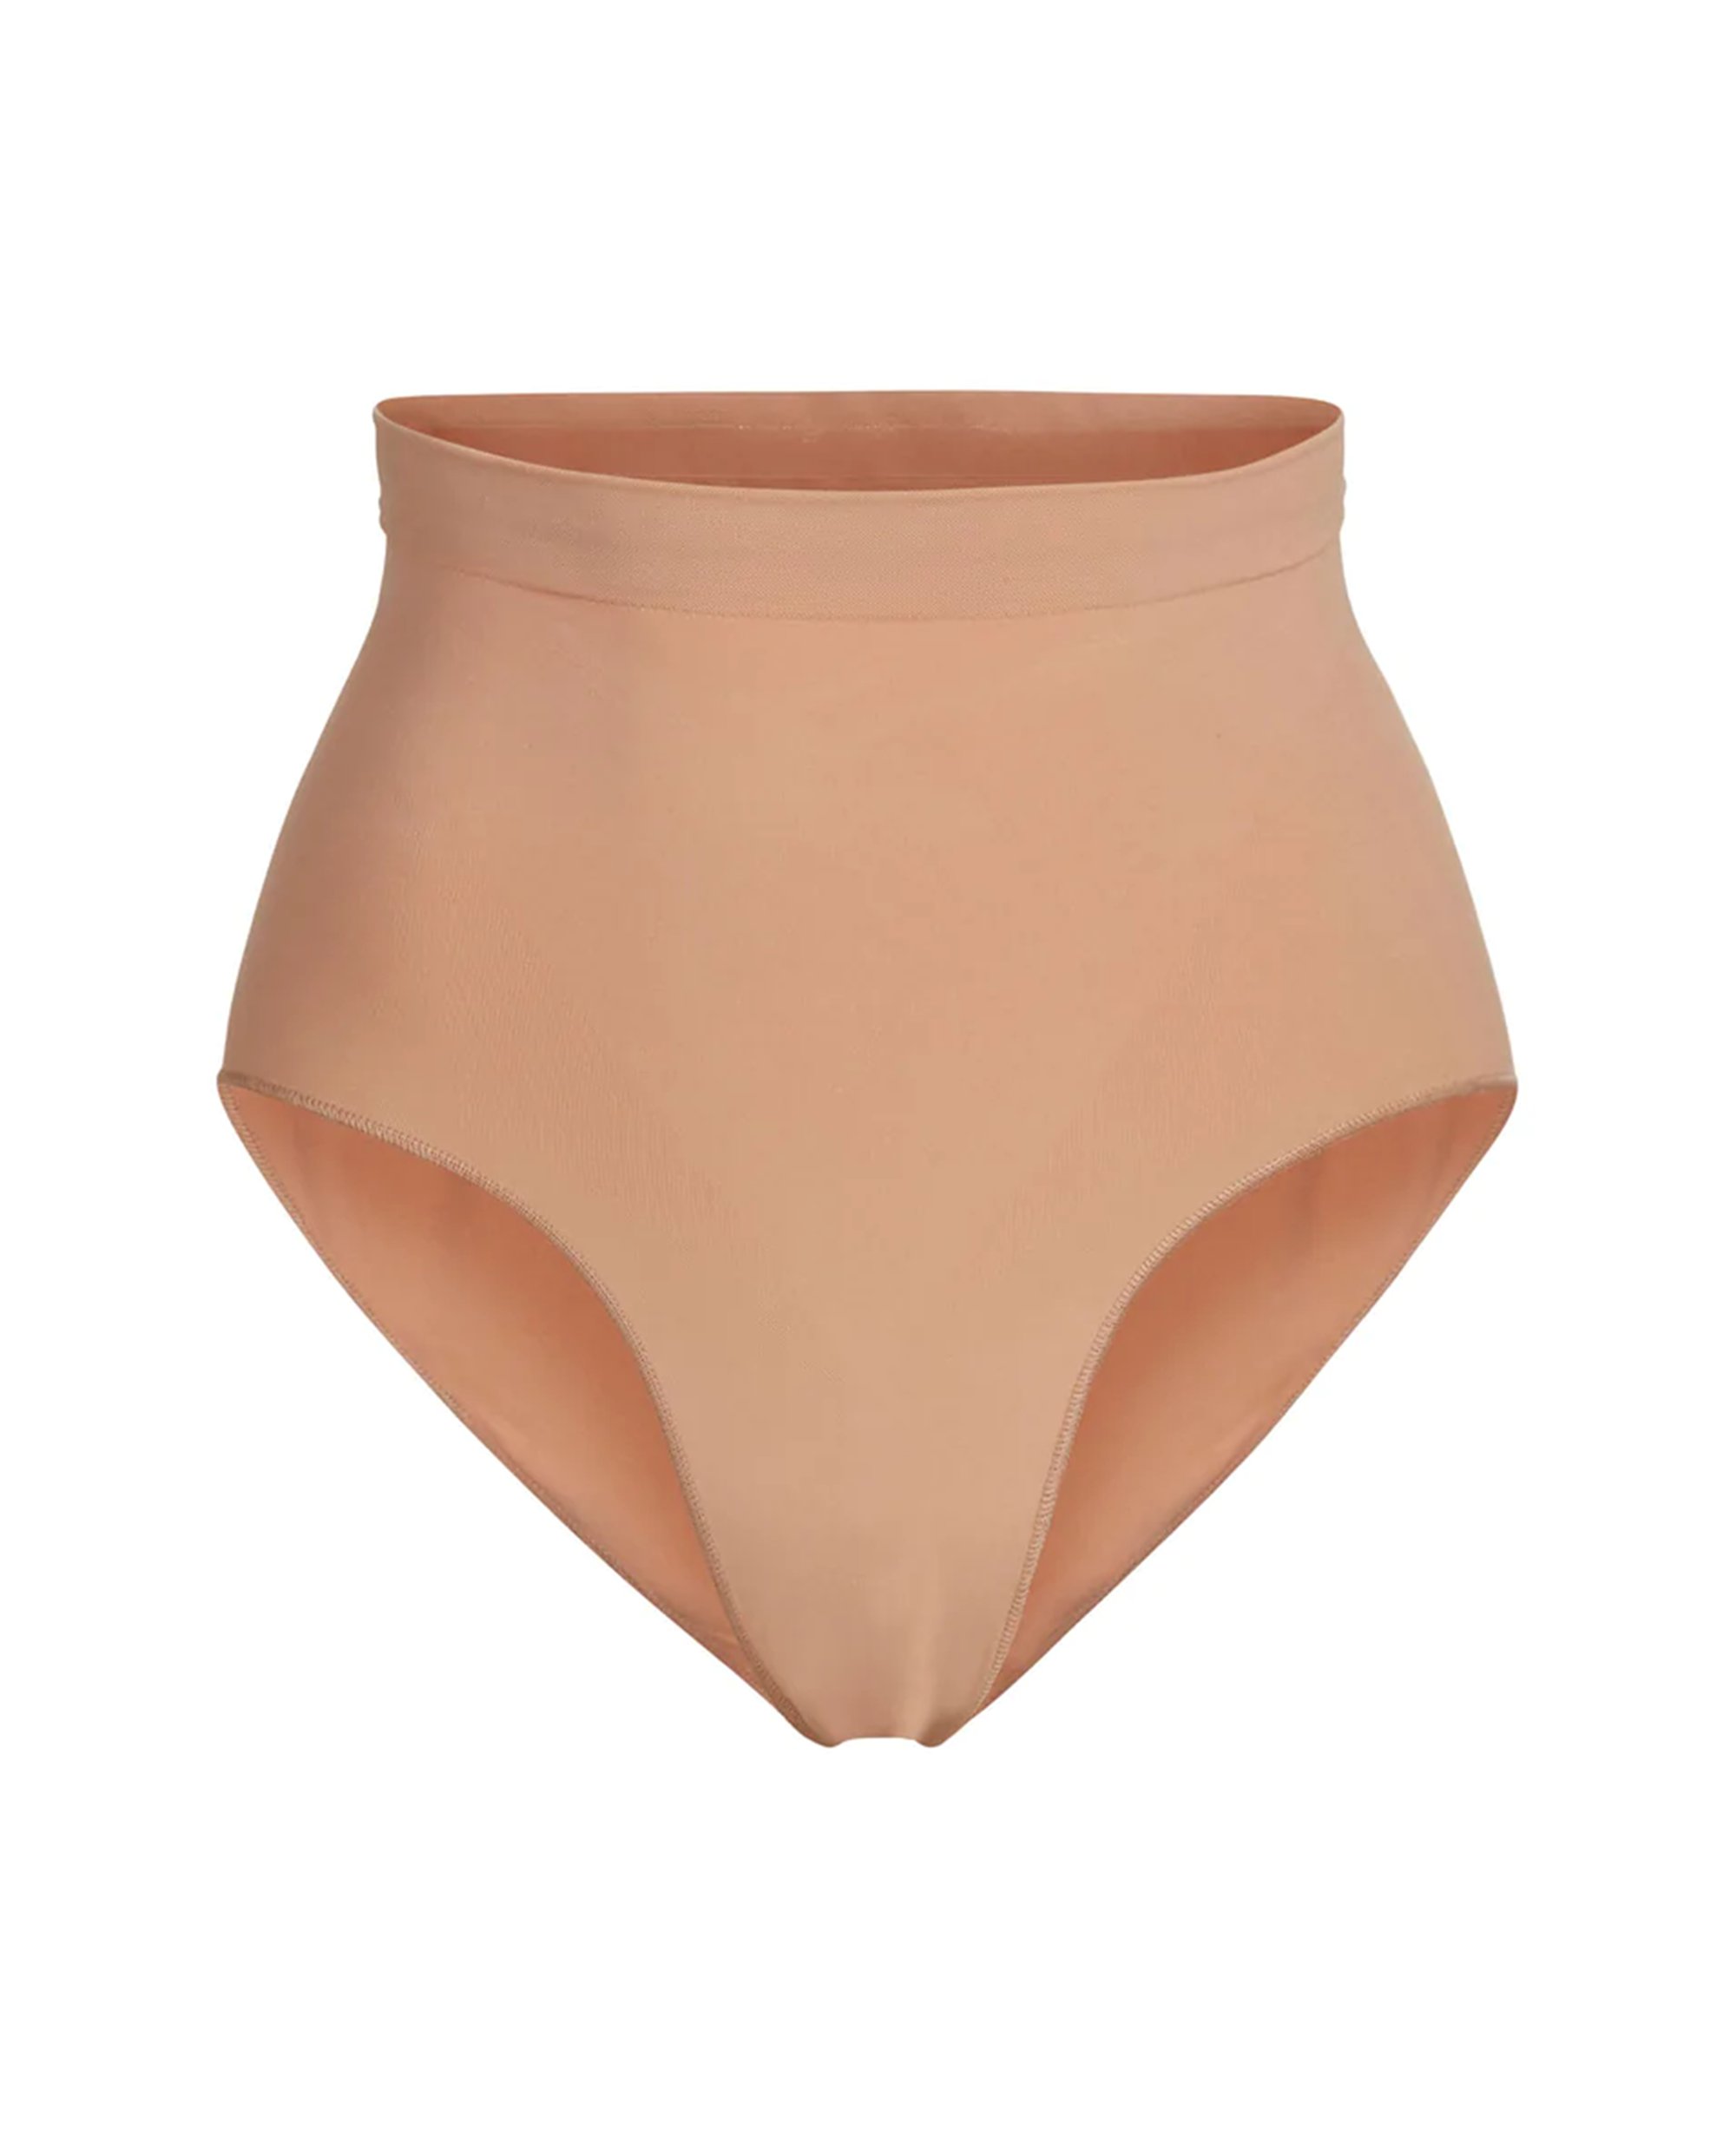 New Women's SKIMS Clay Barely There High Waist Thong Size M